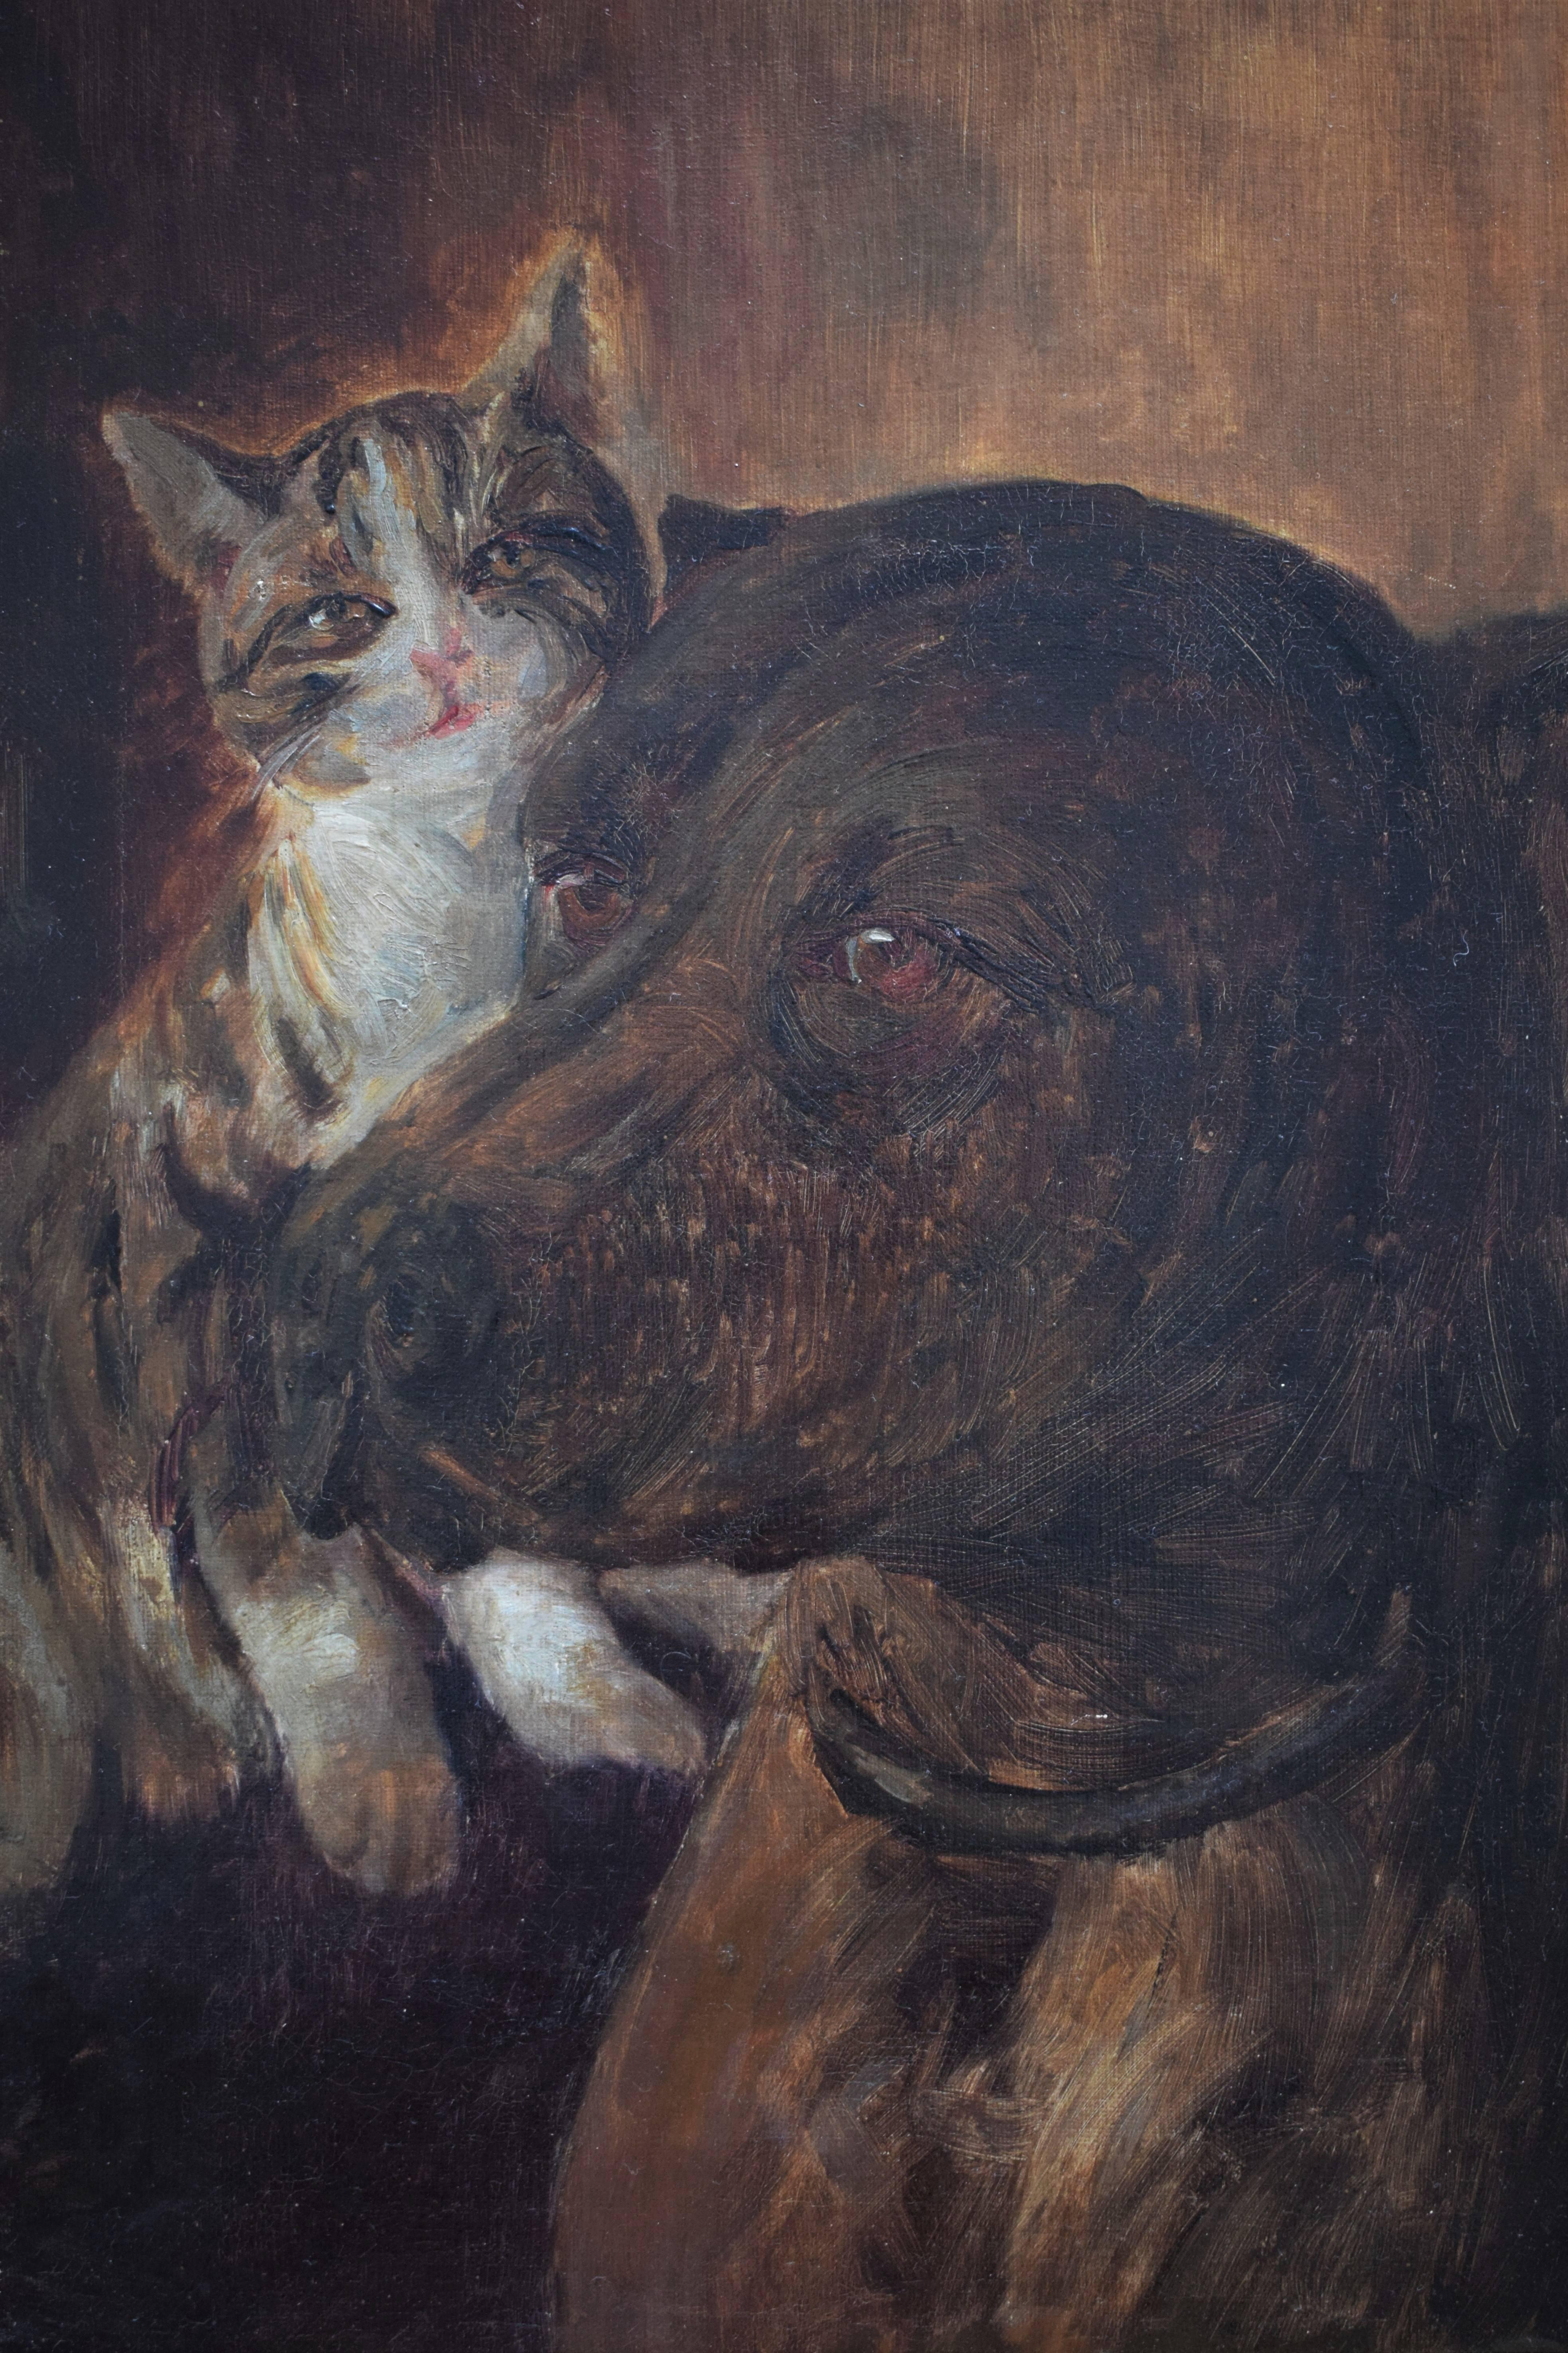 Oil painting of dog and cat by the Danish painter Carl Carlsen (1855-1917).
Signed: Carl Carlsen 1902.